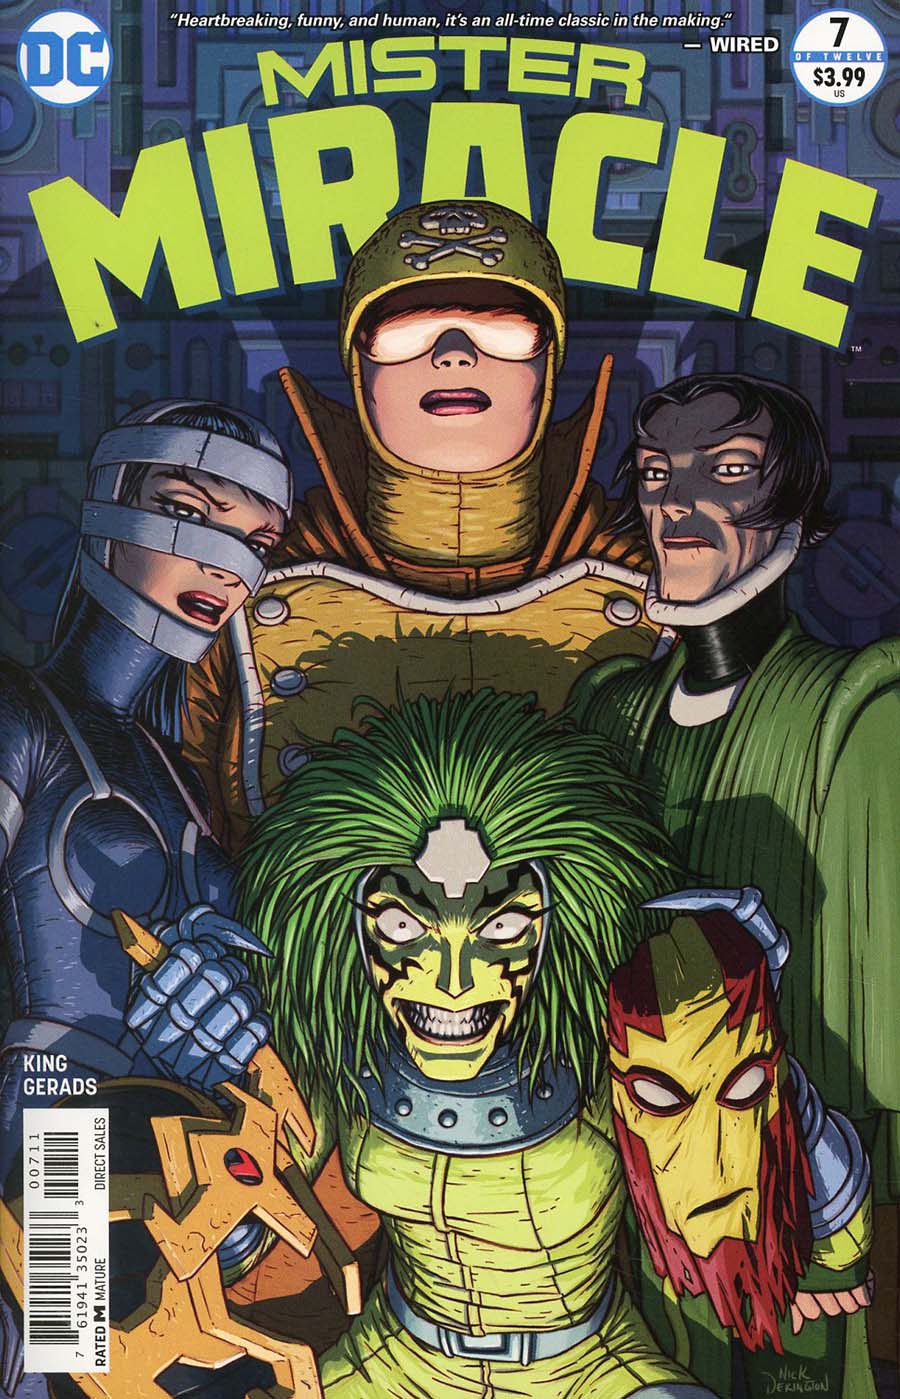 Mister Miracle Vol 4 #7 Cover A Regular Nick Derington Cover